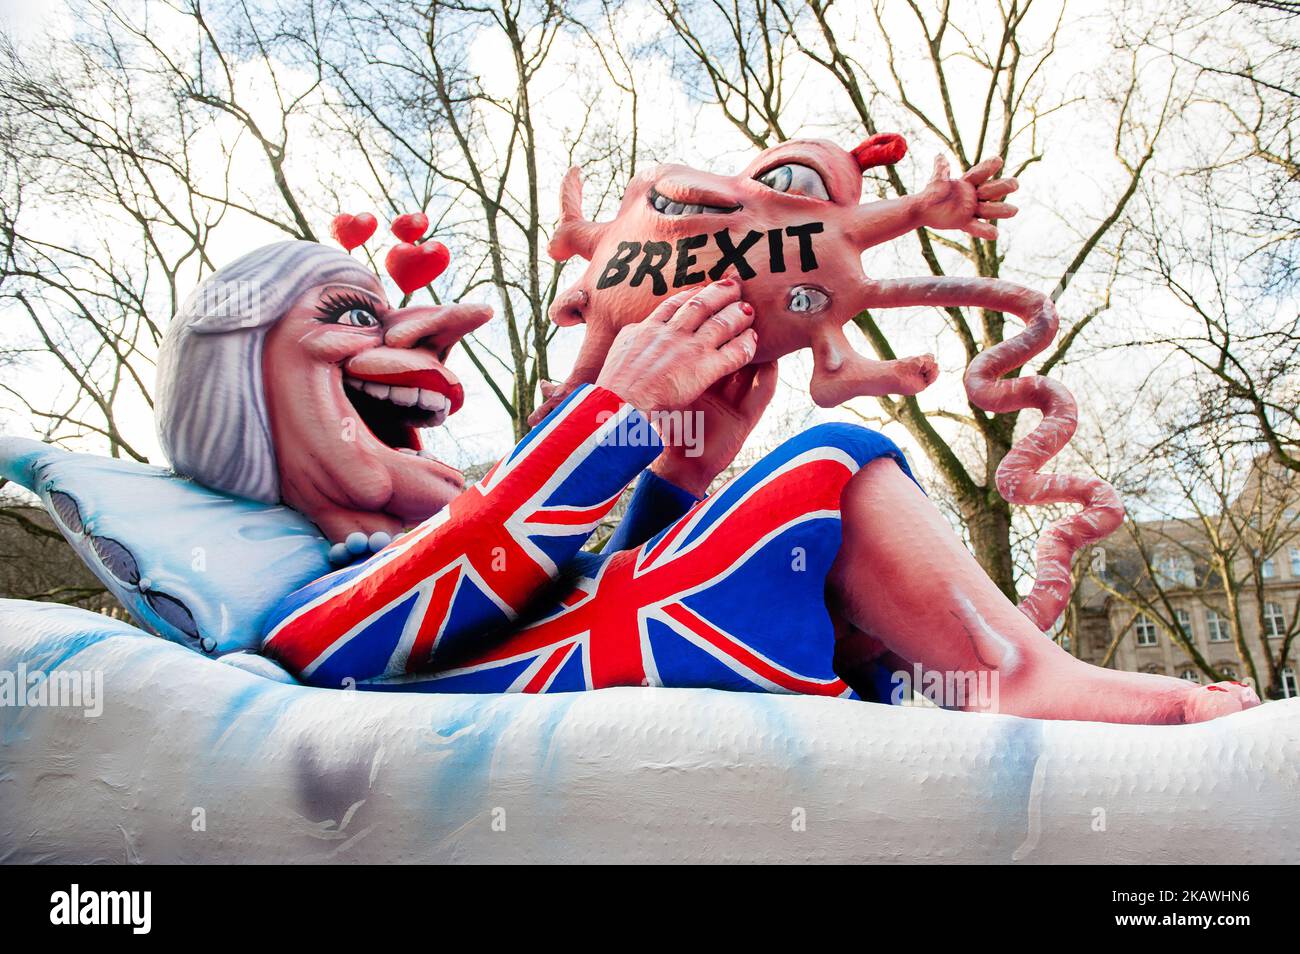 A float featuring Prime Minister Theresa May is seen during the annual Rose Monday parade on February 12, 2018 in Dusseldorf, Germany. Political satire is a traditional cornerstone of the annual parades. More than 30 music ensembles and 5,000 participants join the procession through the city. Elaborately built and decorated floats address cultural and political issues and can be satirical, hilarious and even controversial. The politically themed floats of satirist Jacques Tilly are famous the world over. (Photo by Romy Arroyo Fernandez/NurPhoto) Stock Photo